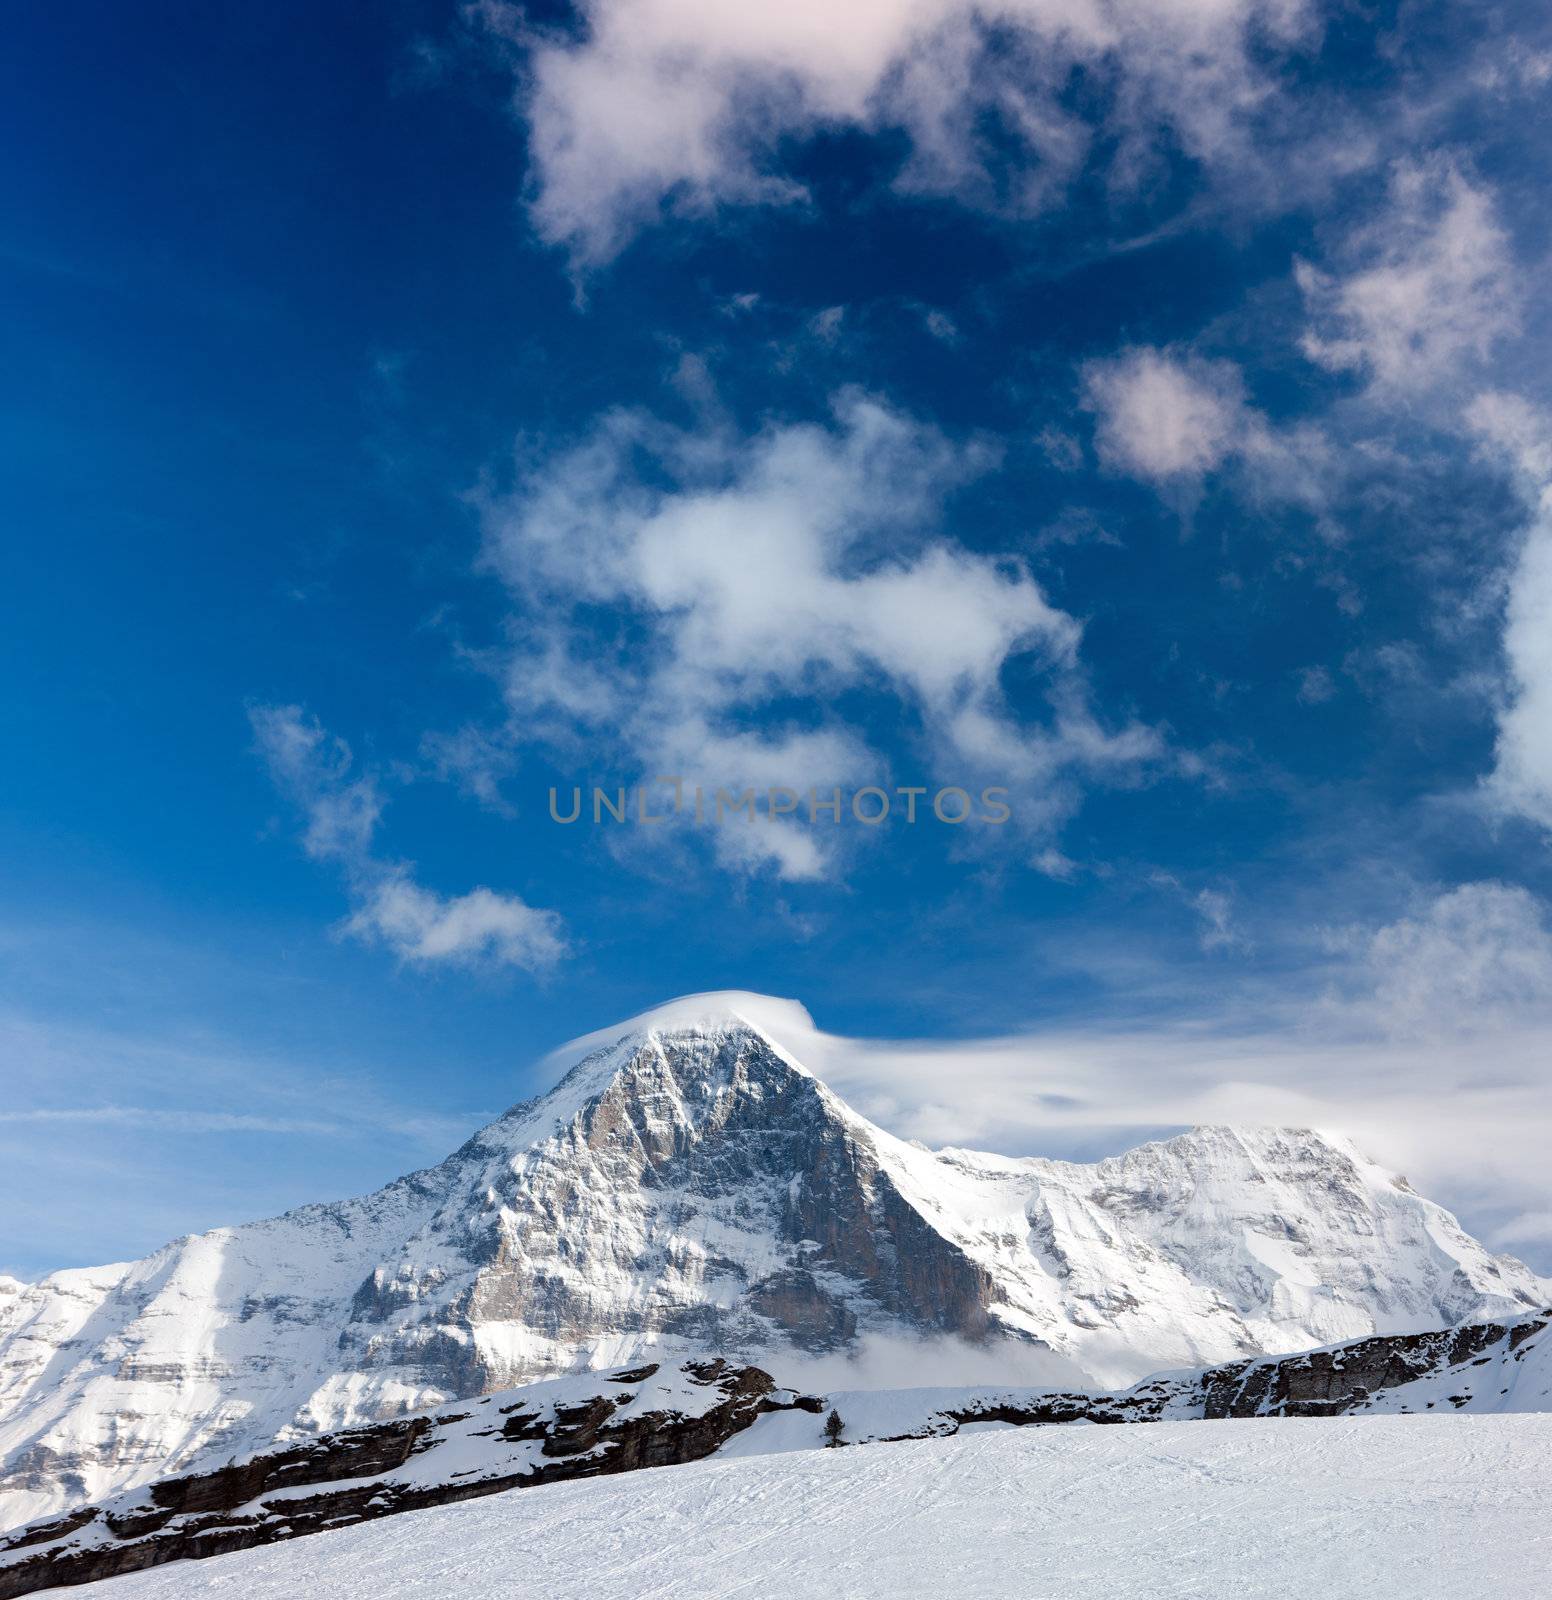 Ski slope in the background of Mount Eiger. The Eiger is a mountain in the Bernese Alps in Switzerland.